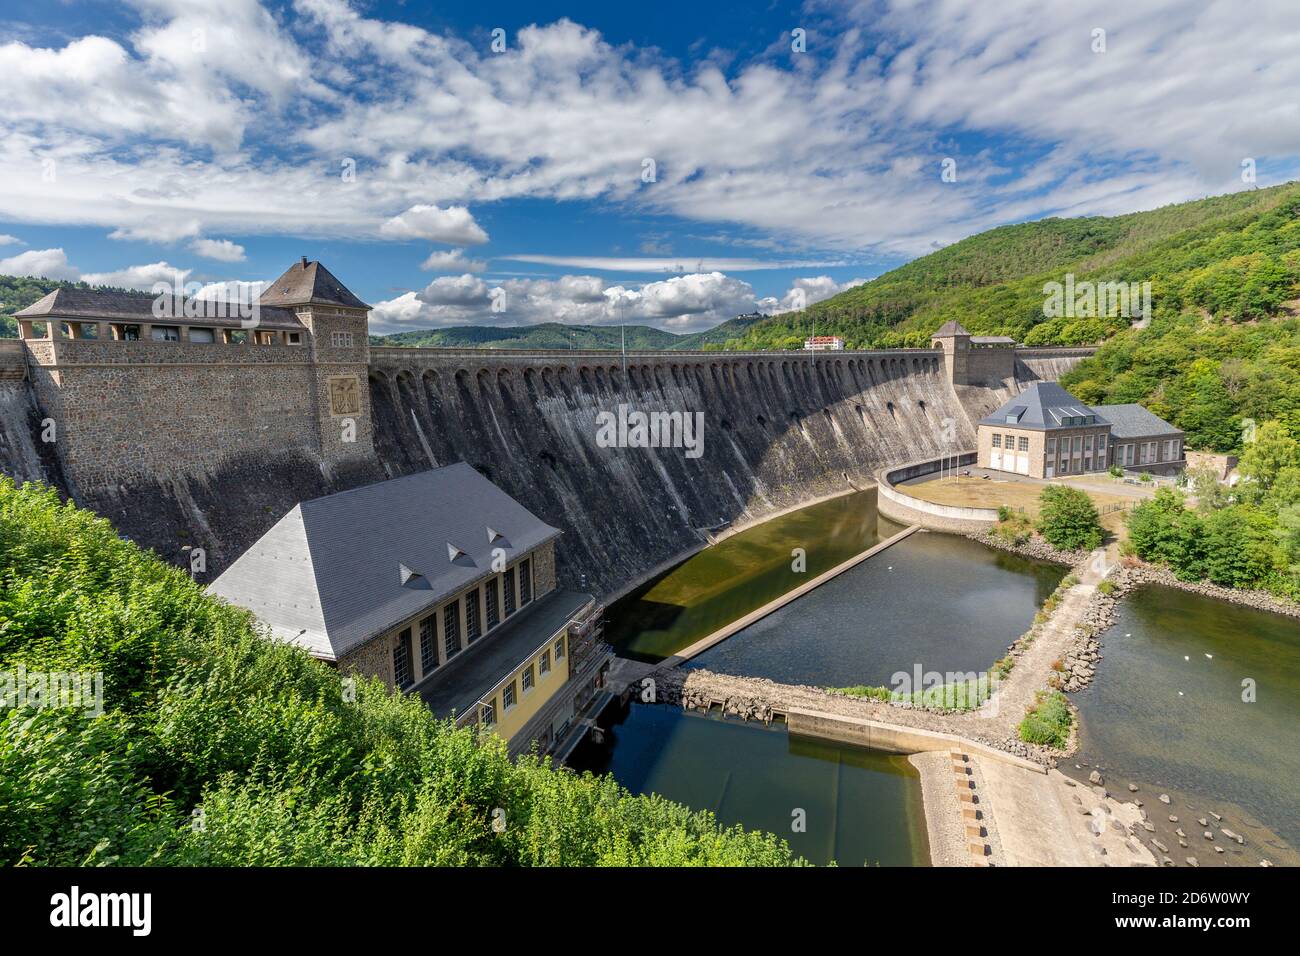 The Edersee Dam, a hydroelectric dam spanning the Eder river in northern Hesse, Germany. Stock Photo